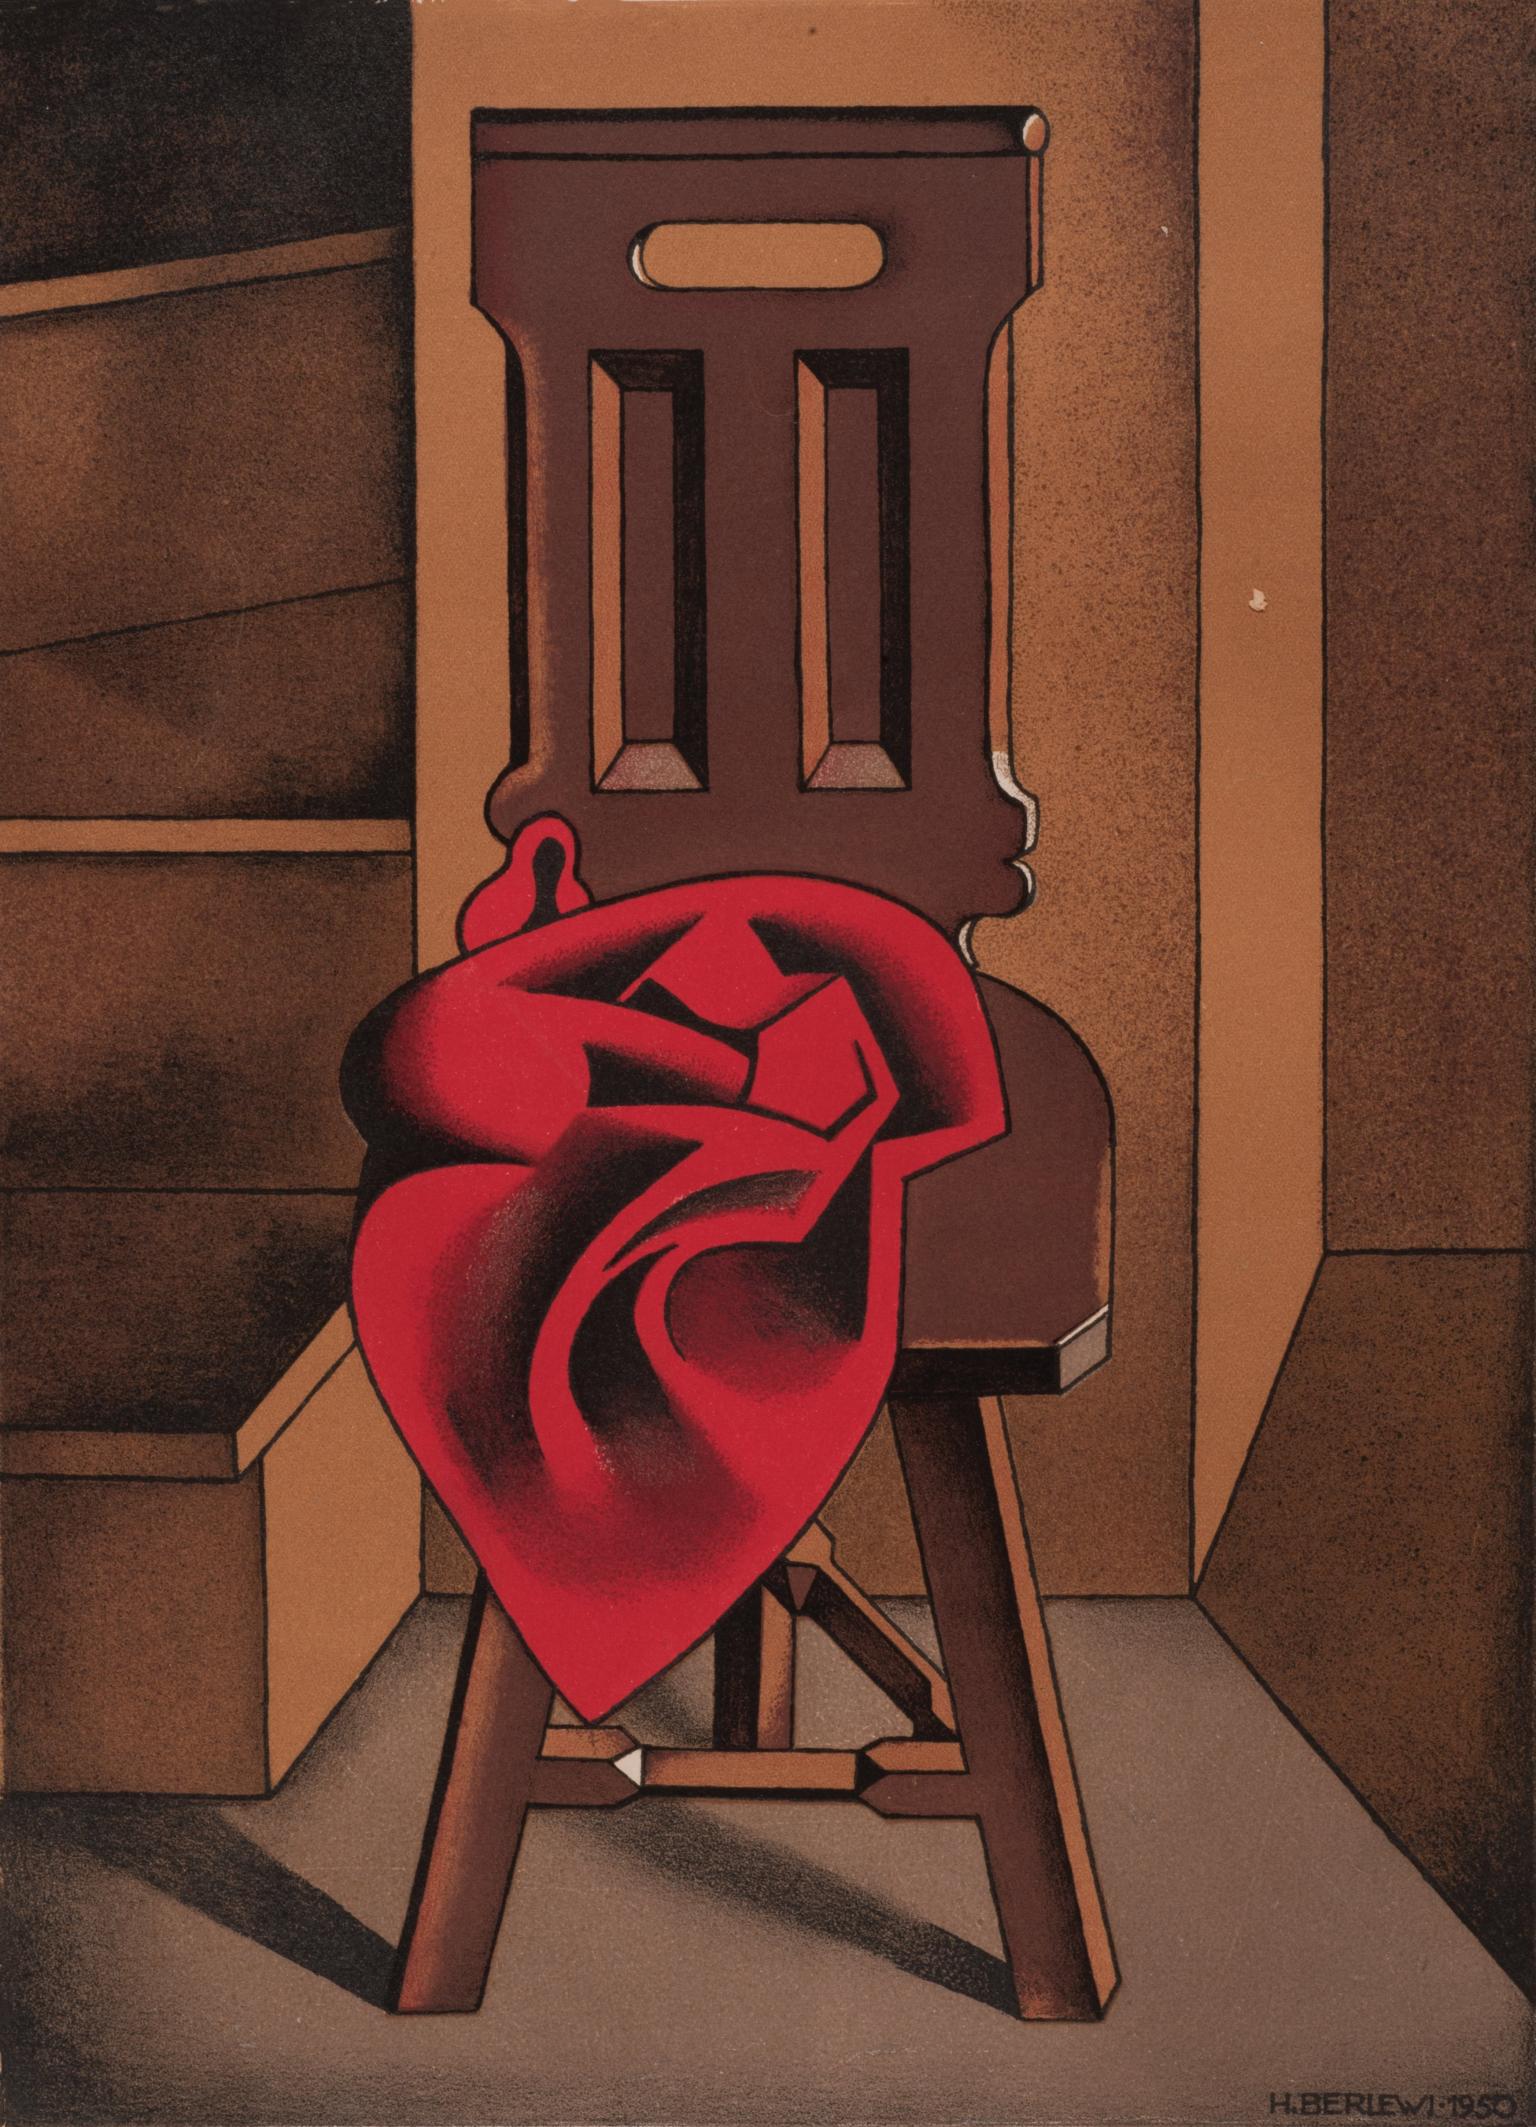 Lithograph featuring a chair in the center with an object with many folds on its seat, and a stairwell to the left.